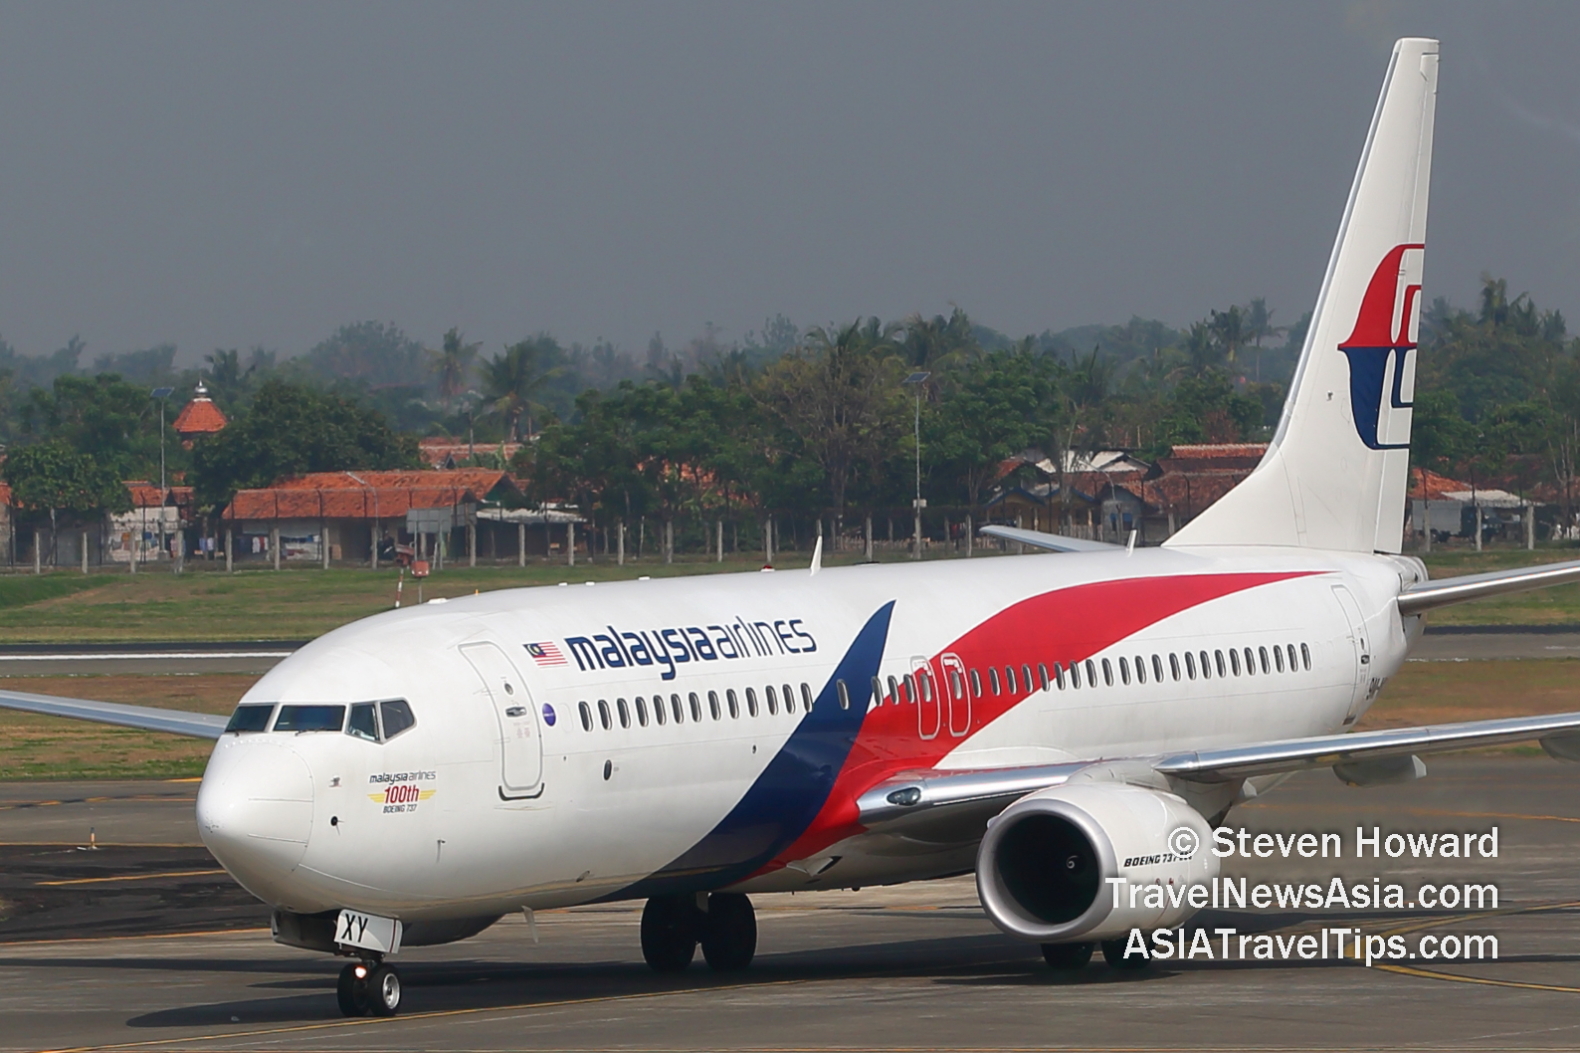 Malaysia Airlines Boeing 737-8. Picture by Steven Howard of TravelNewsAsia.com Click to enlarge.